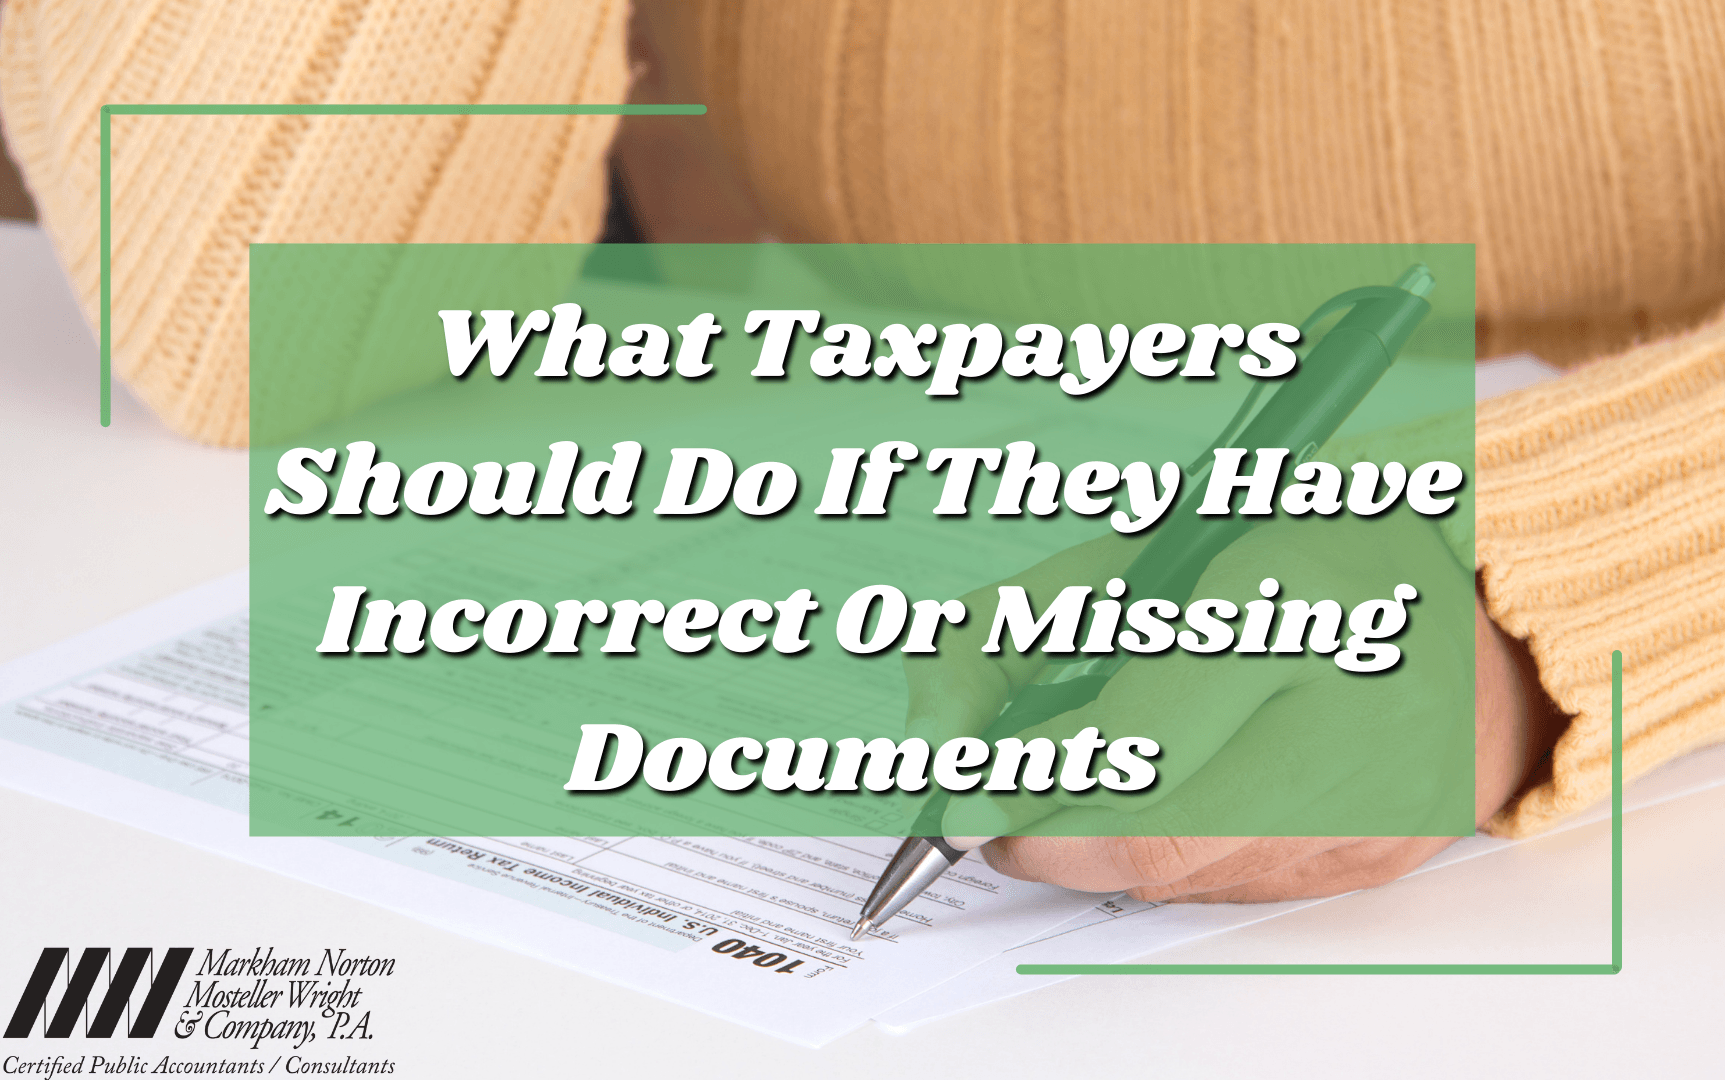 What Taxpayers should do when filing with incorrect or missing documents with